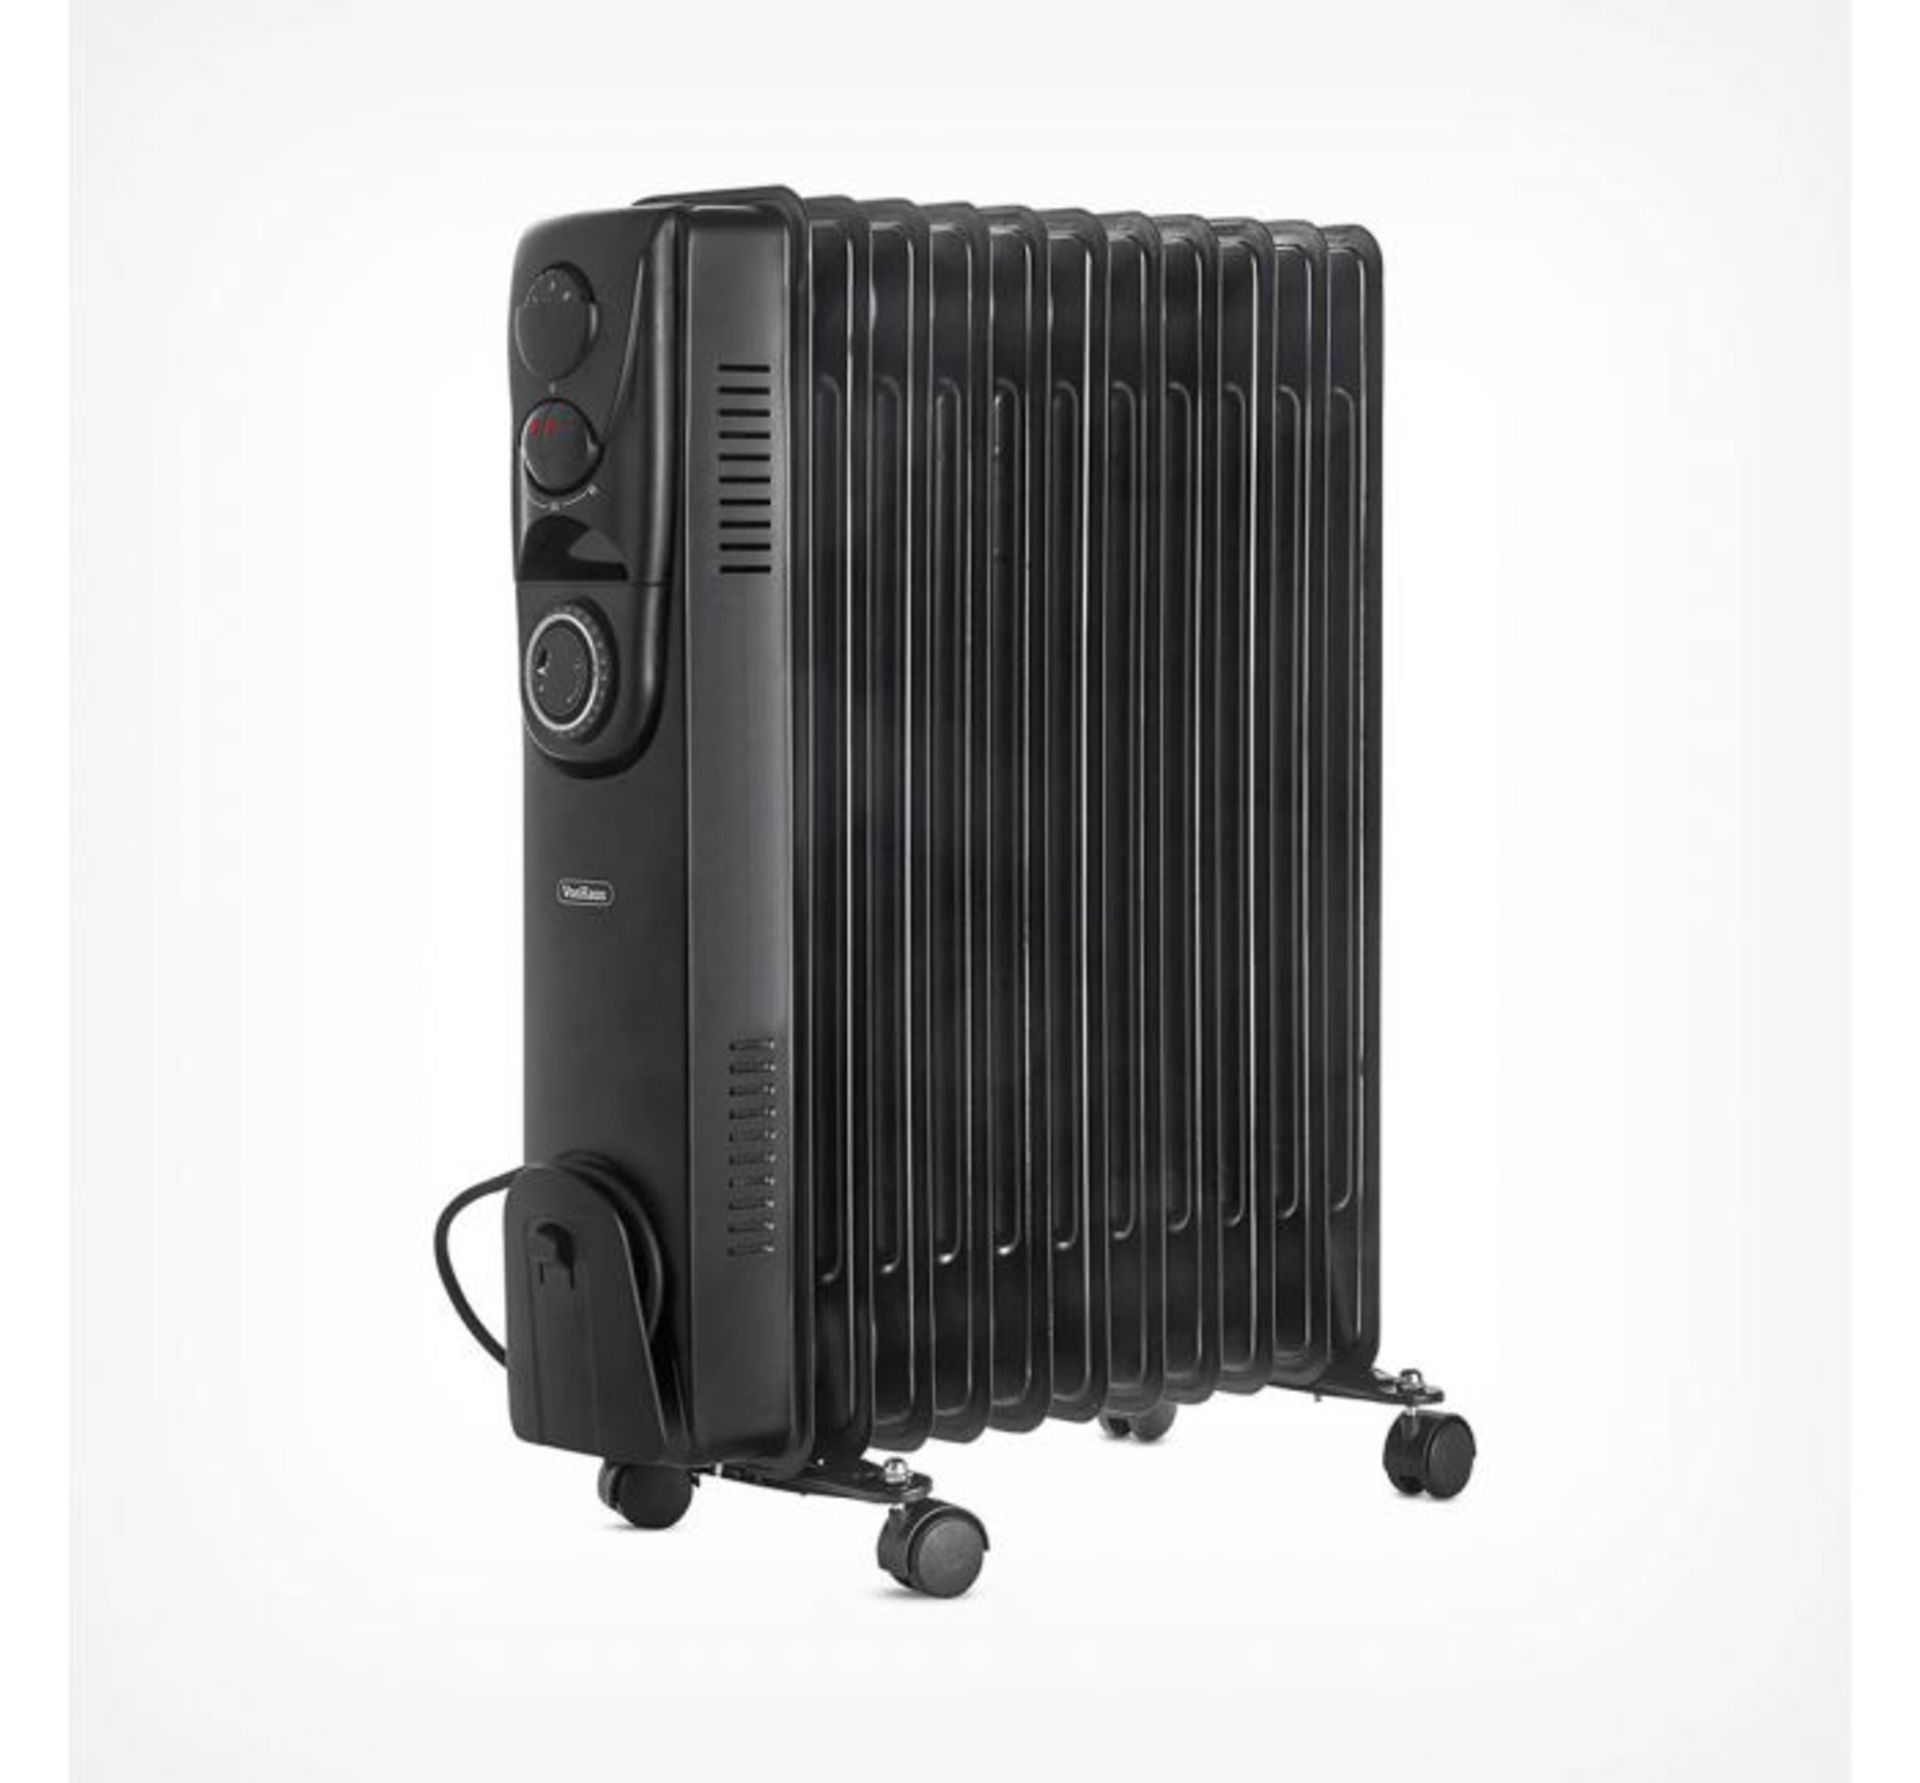 (HZ95) 11 Fin 2500W Oil Filled Radiator - Black 3 power settings (1000/1500/2500) and adjustab... - Image 2 of 3